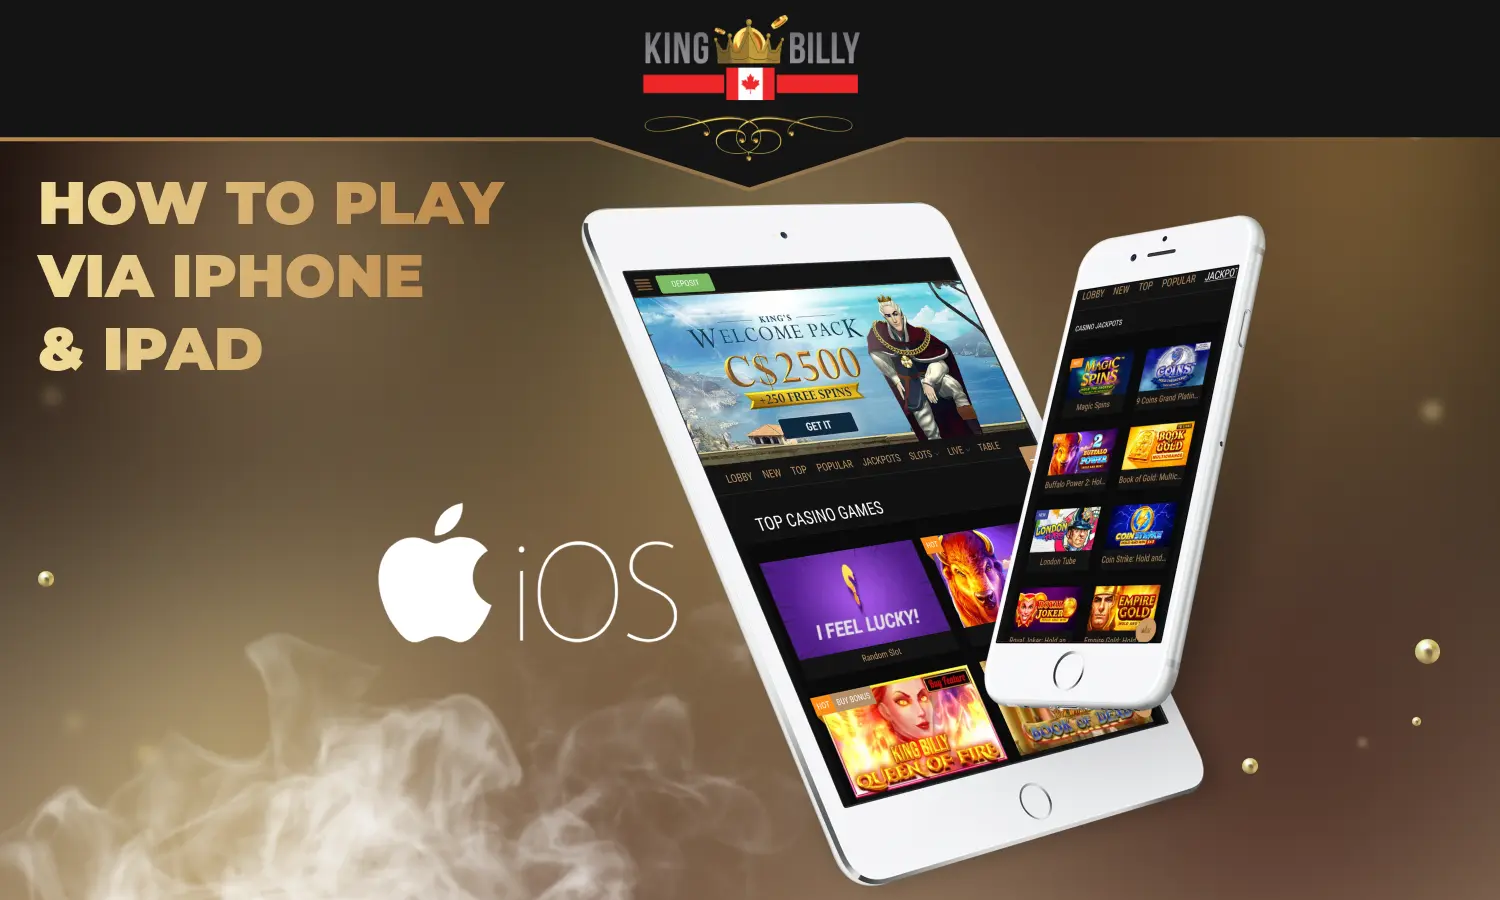 Canadian users Can Play King Billy Mobile Casino from any iOS device